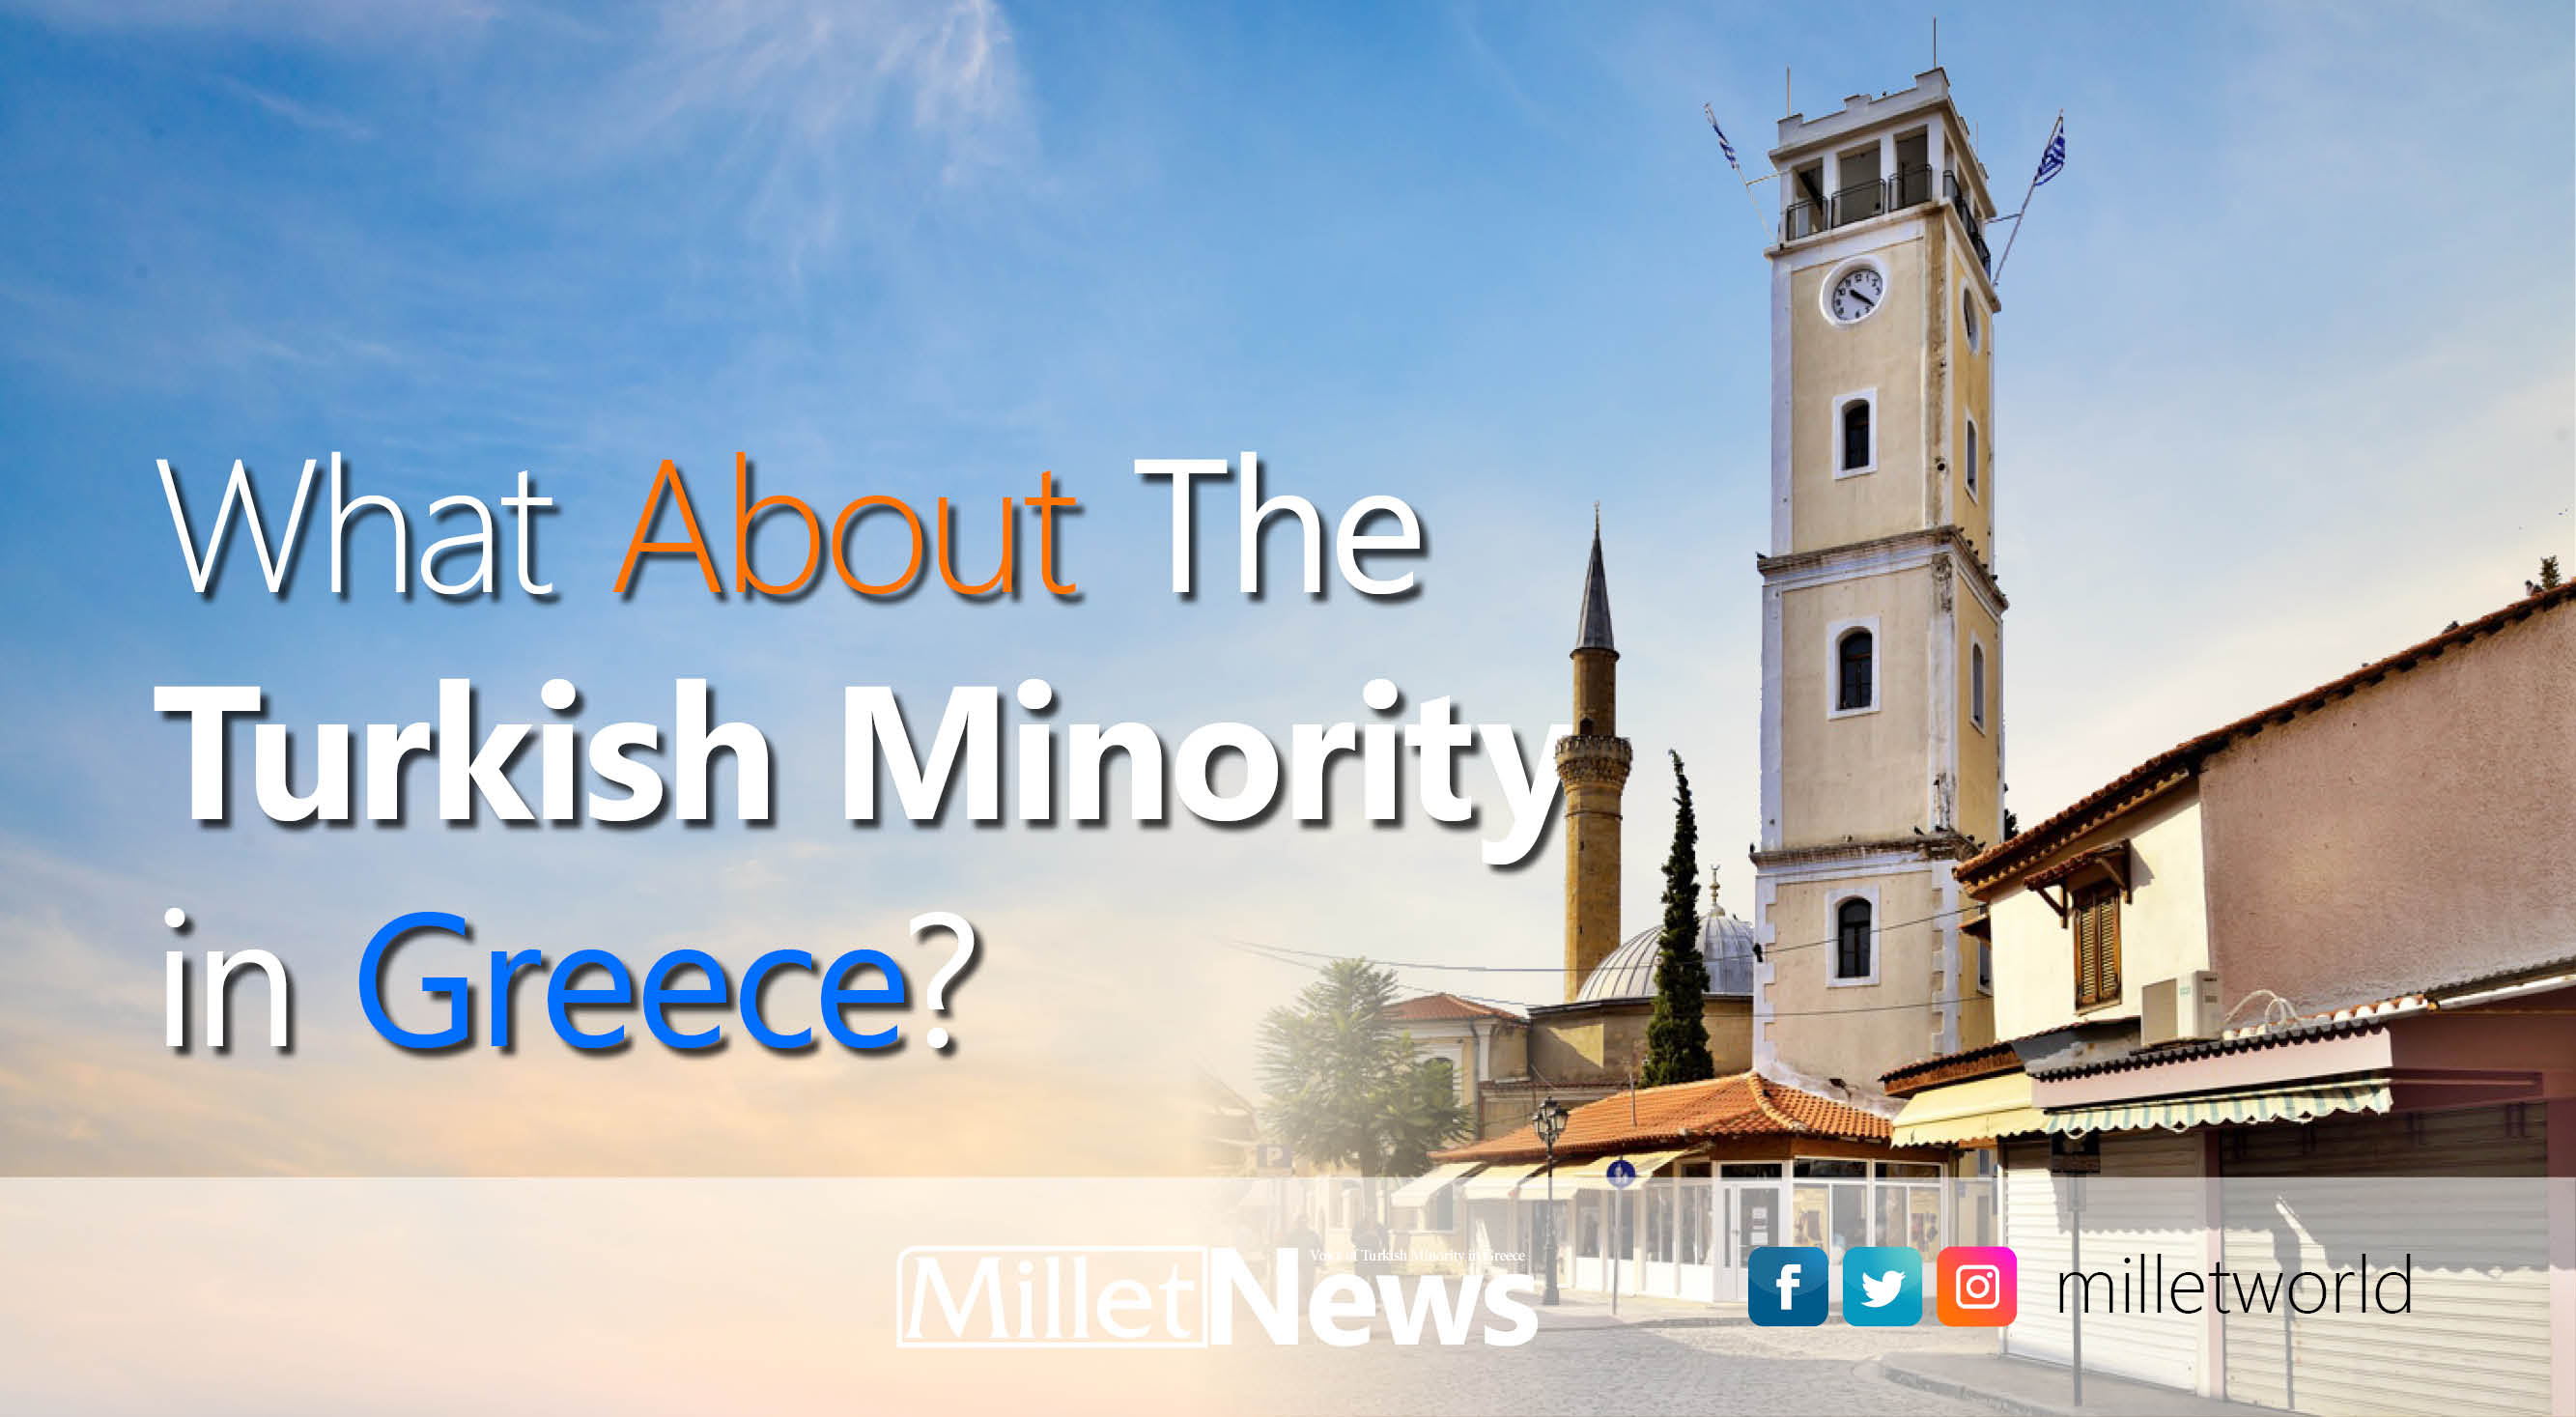 Article 19 and deprivation of Greek citizenship